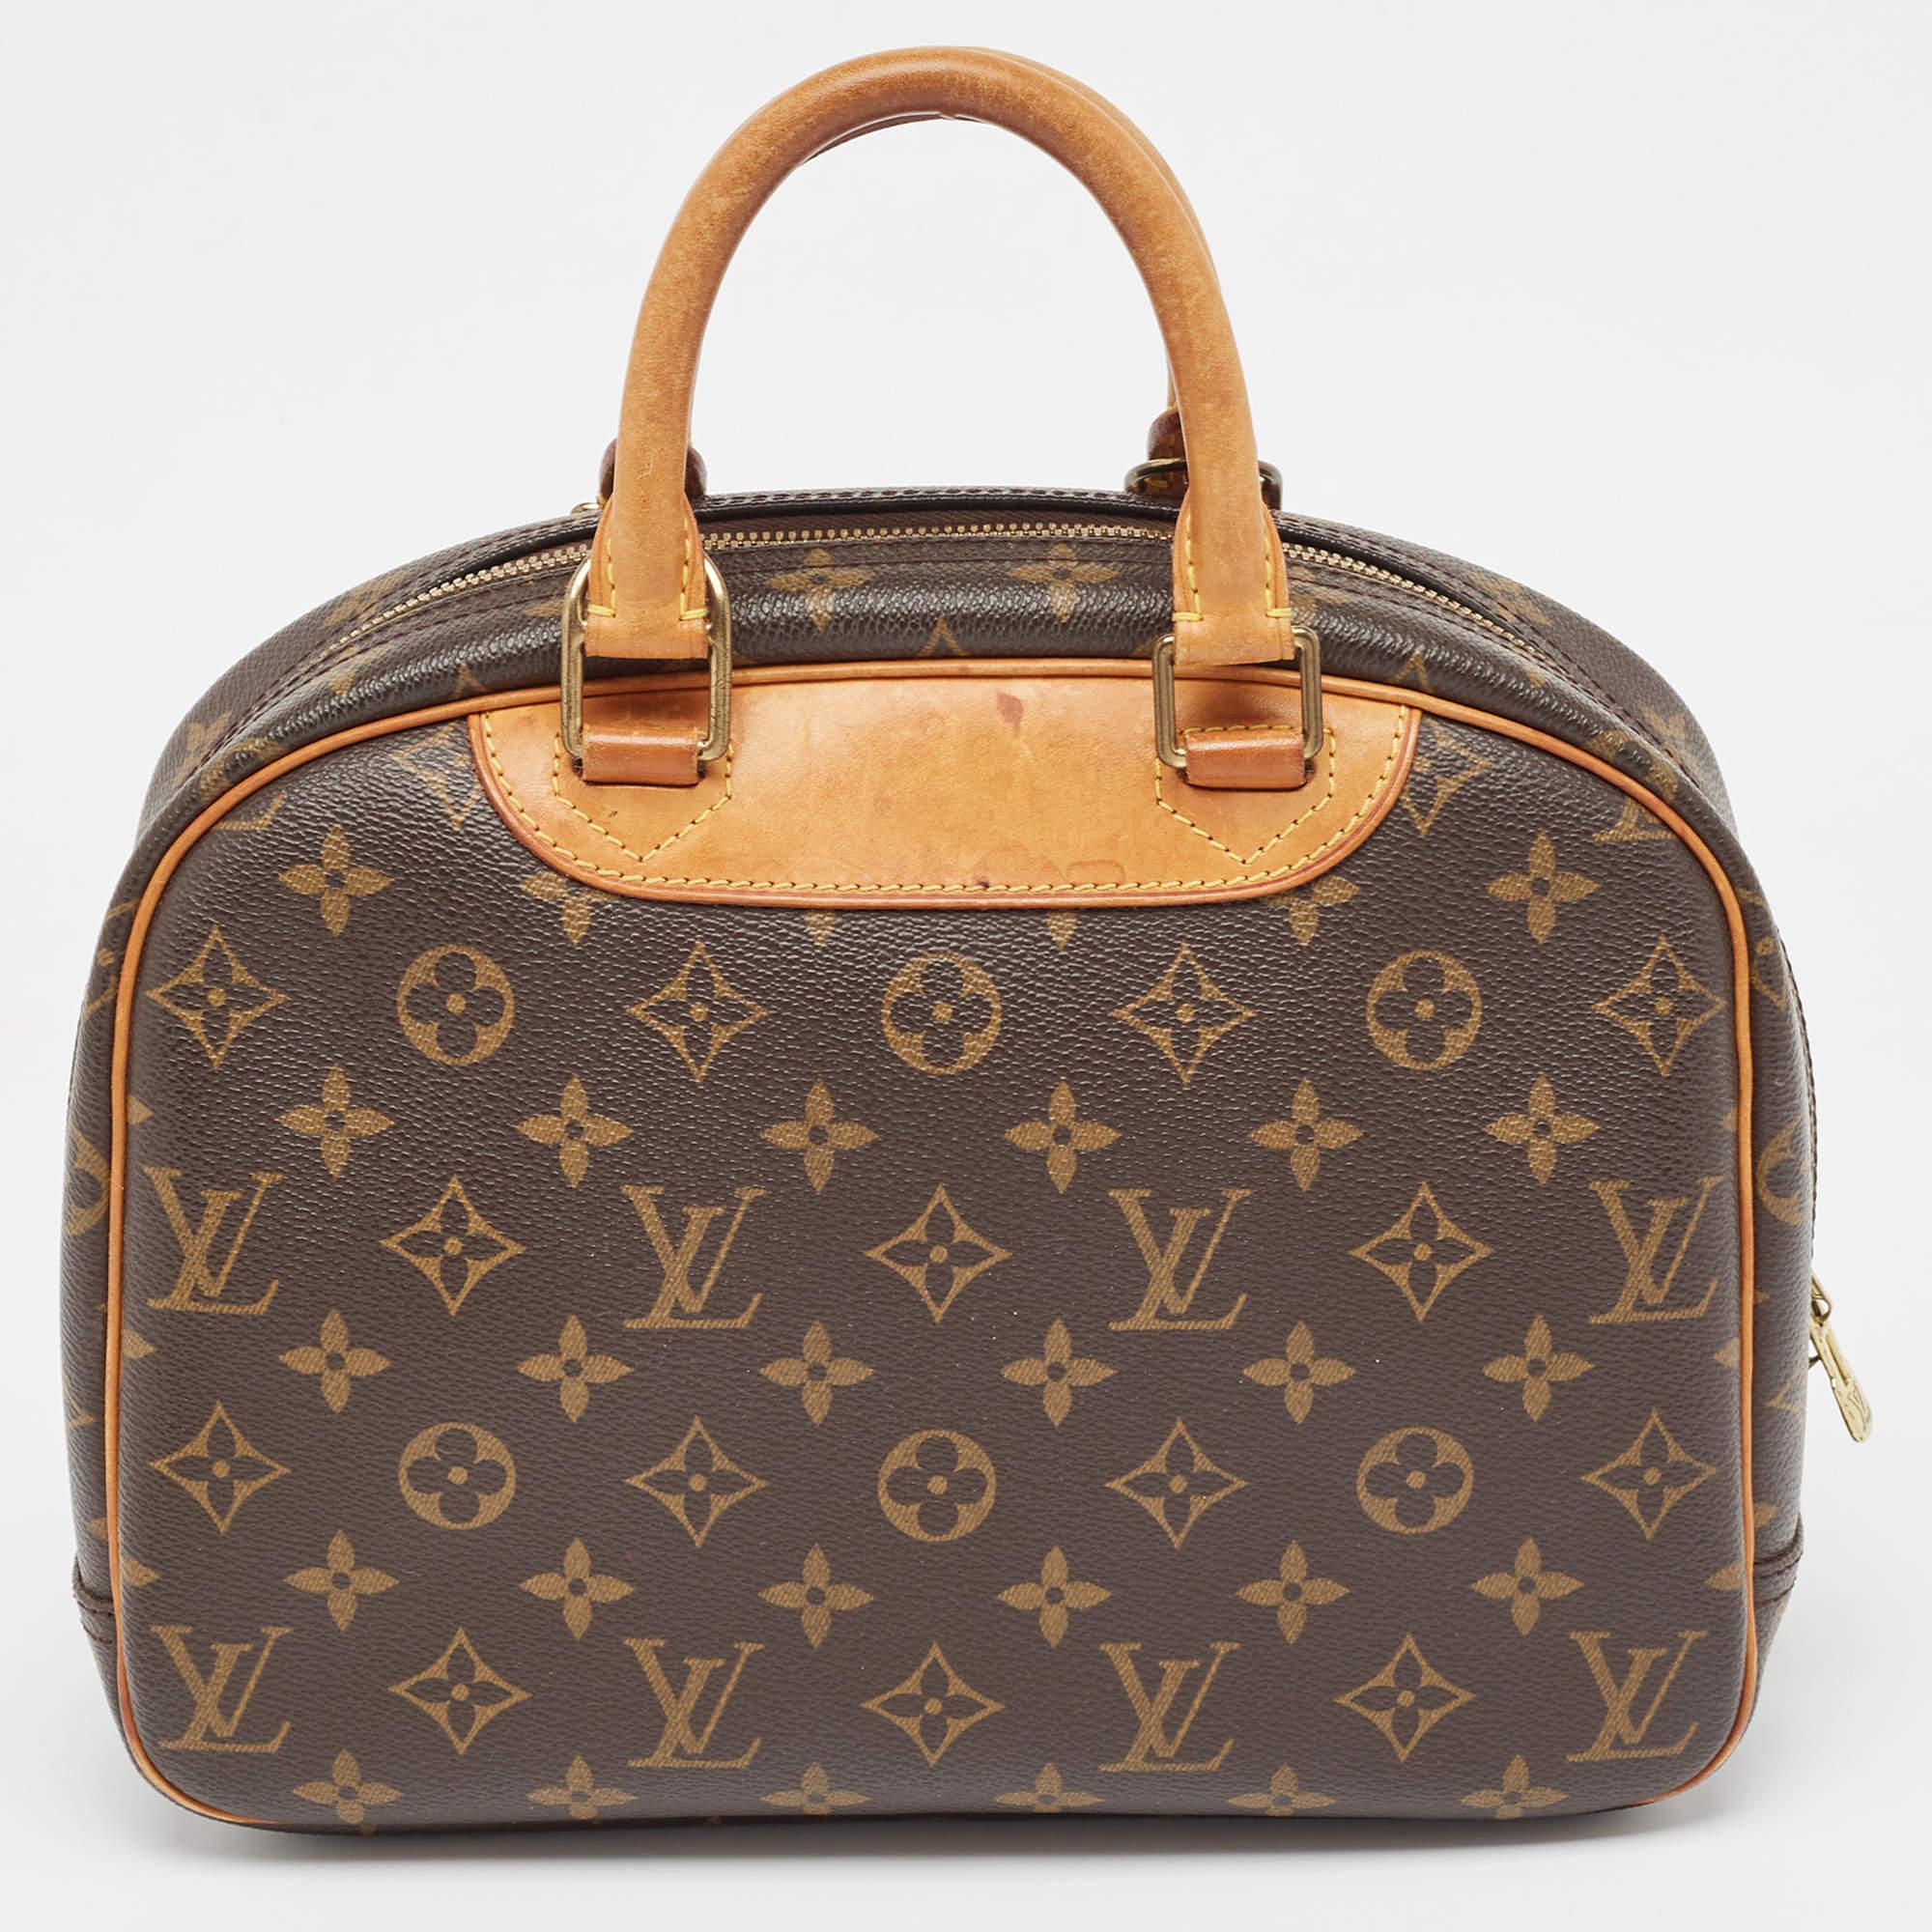 Displaying exquisite craftsmanship, this fabulous LV bag will certainly live up to your expectations. Featuring a chic design, it is made from luxe materials and has a roomy interior for carrying your essentials.

